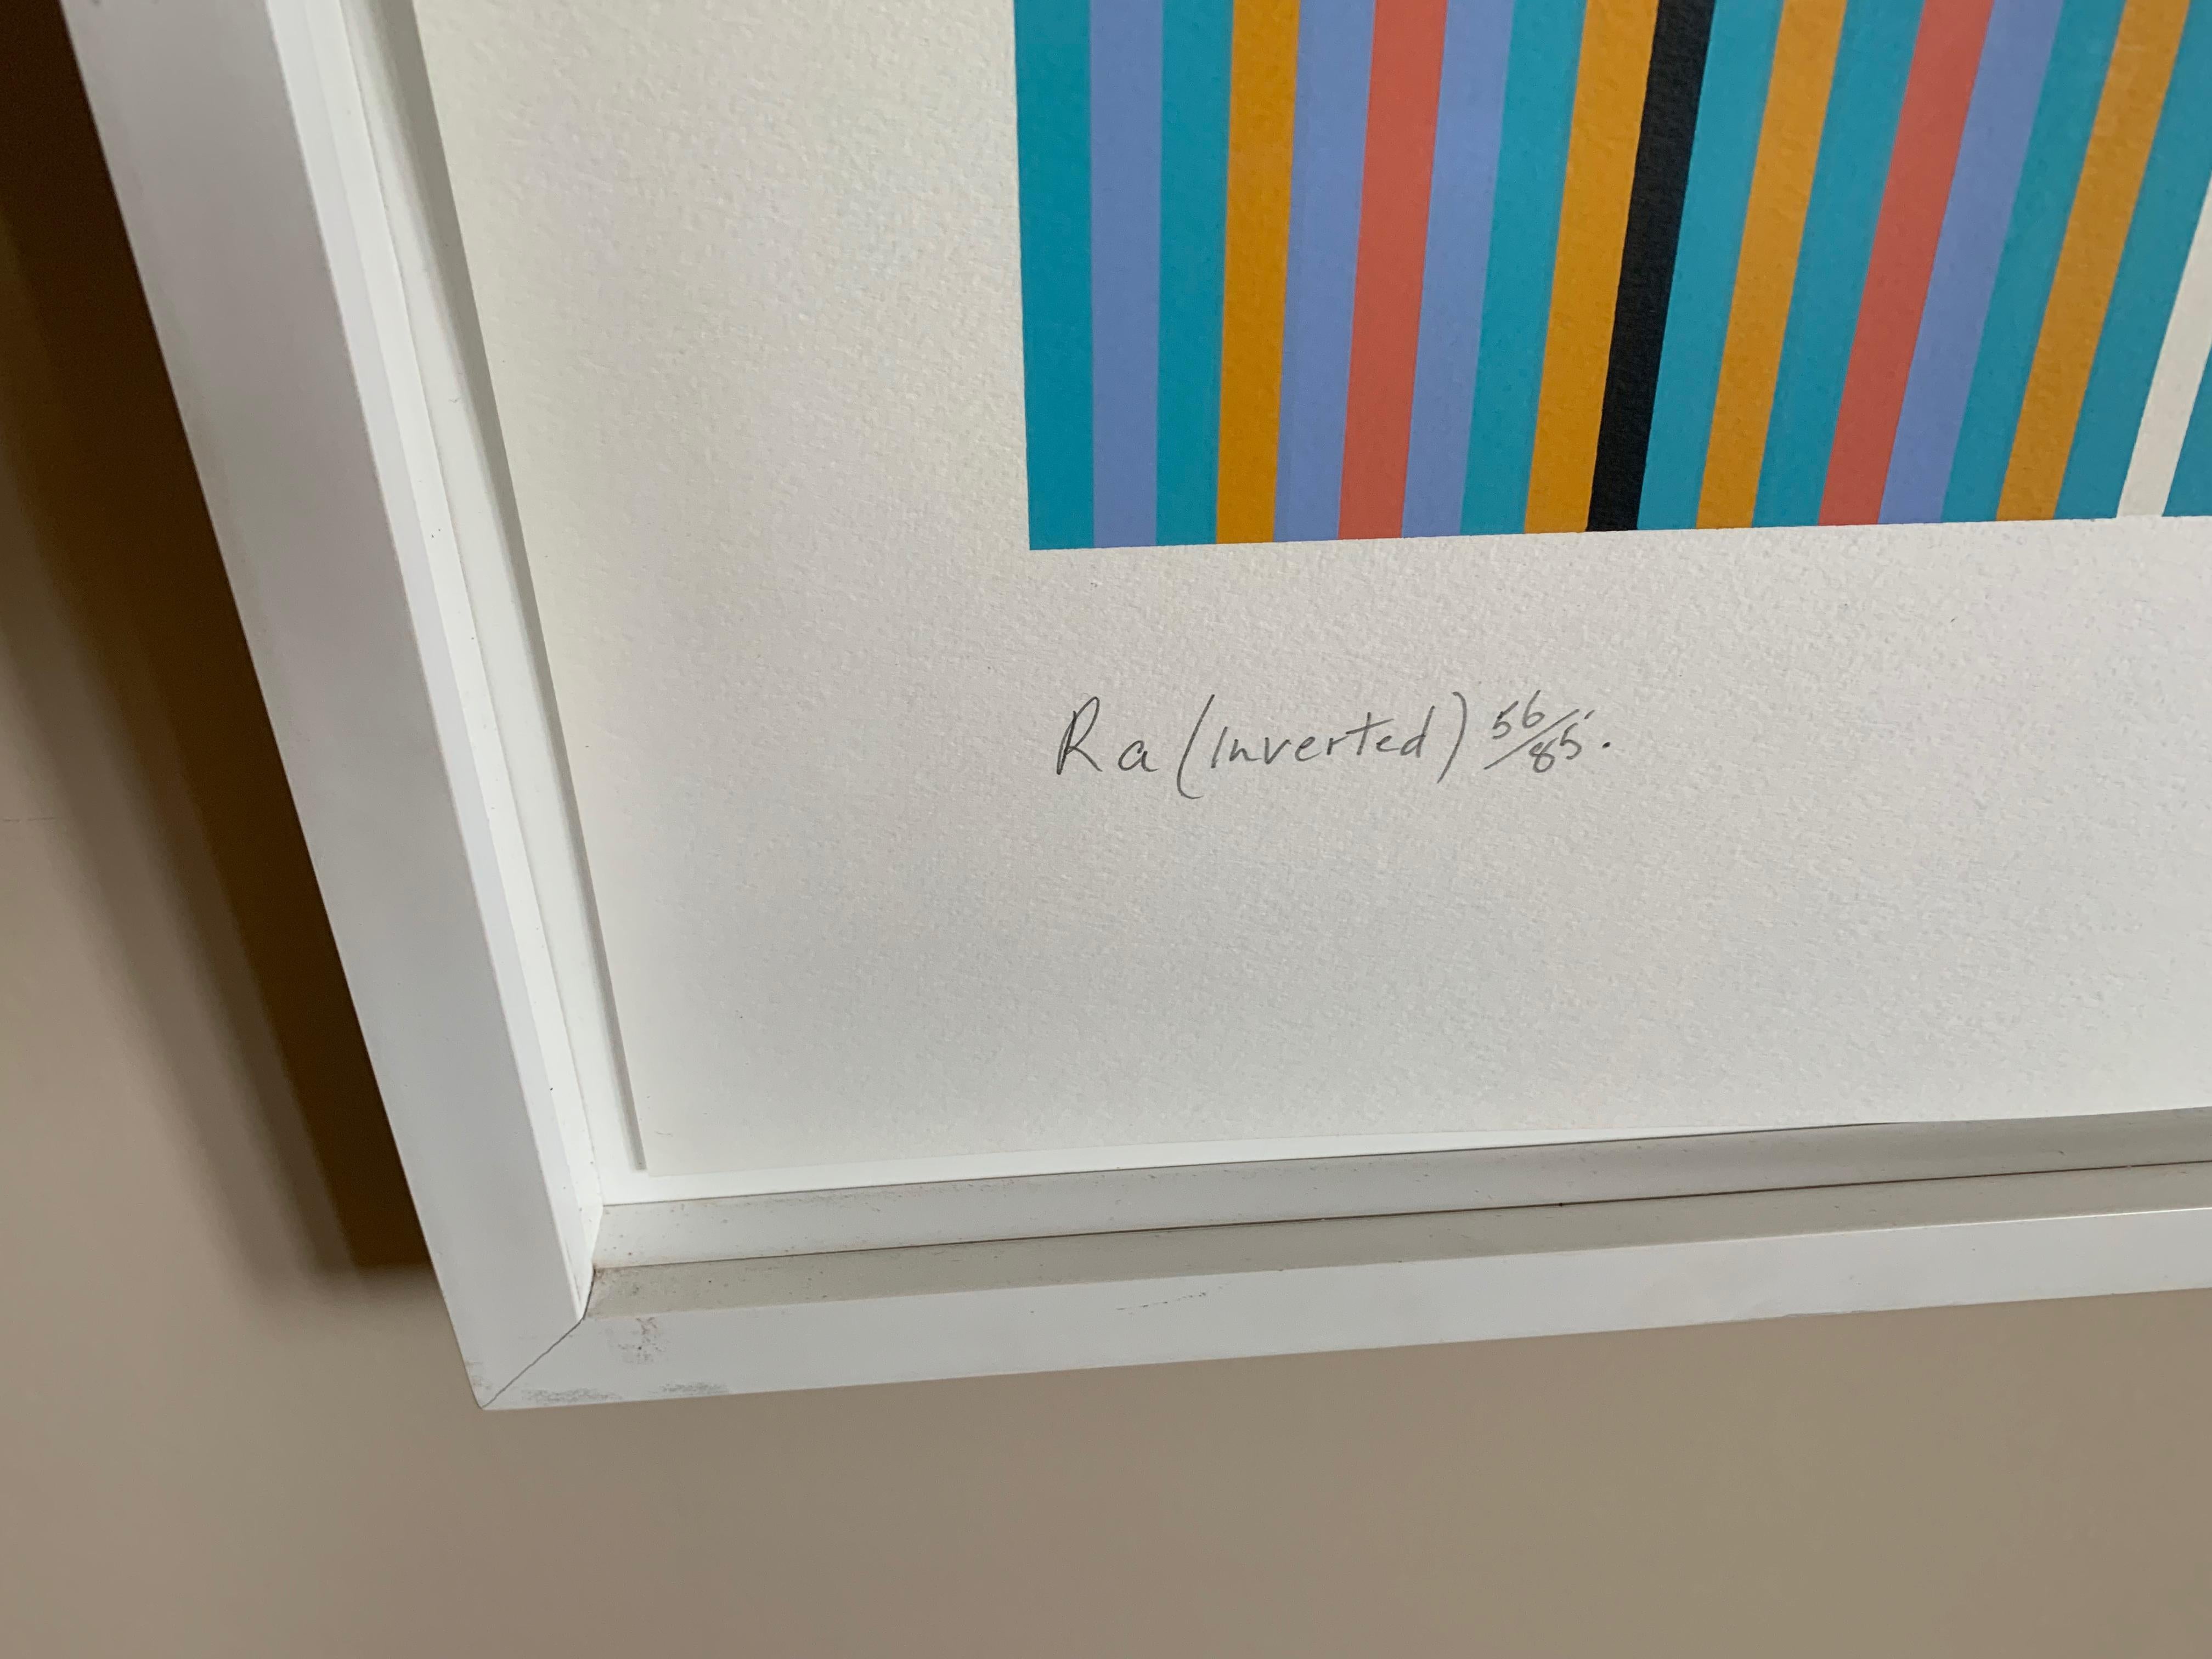 Ra Inverted (Schubert 69), Limited Edition Screen Print by Bridget Riley For Sale 6